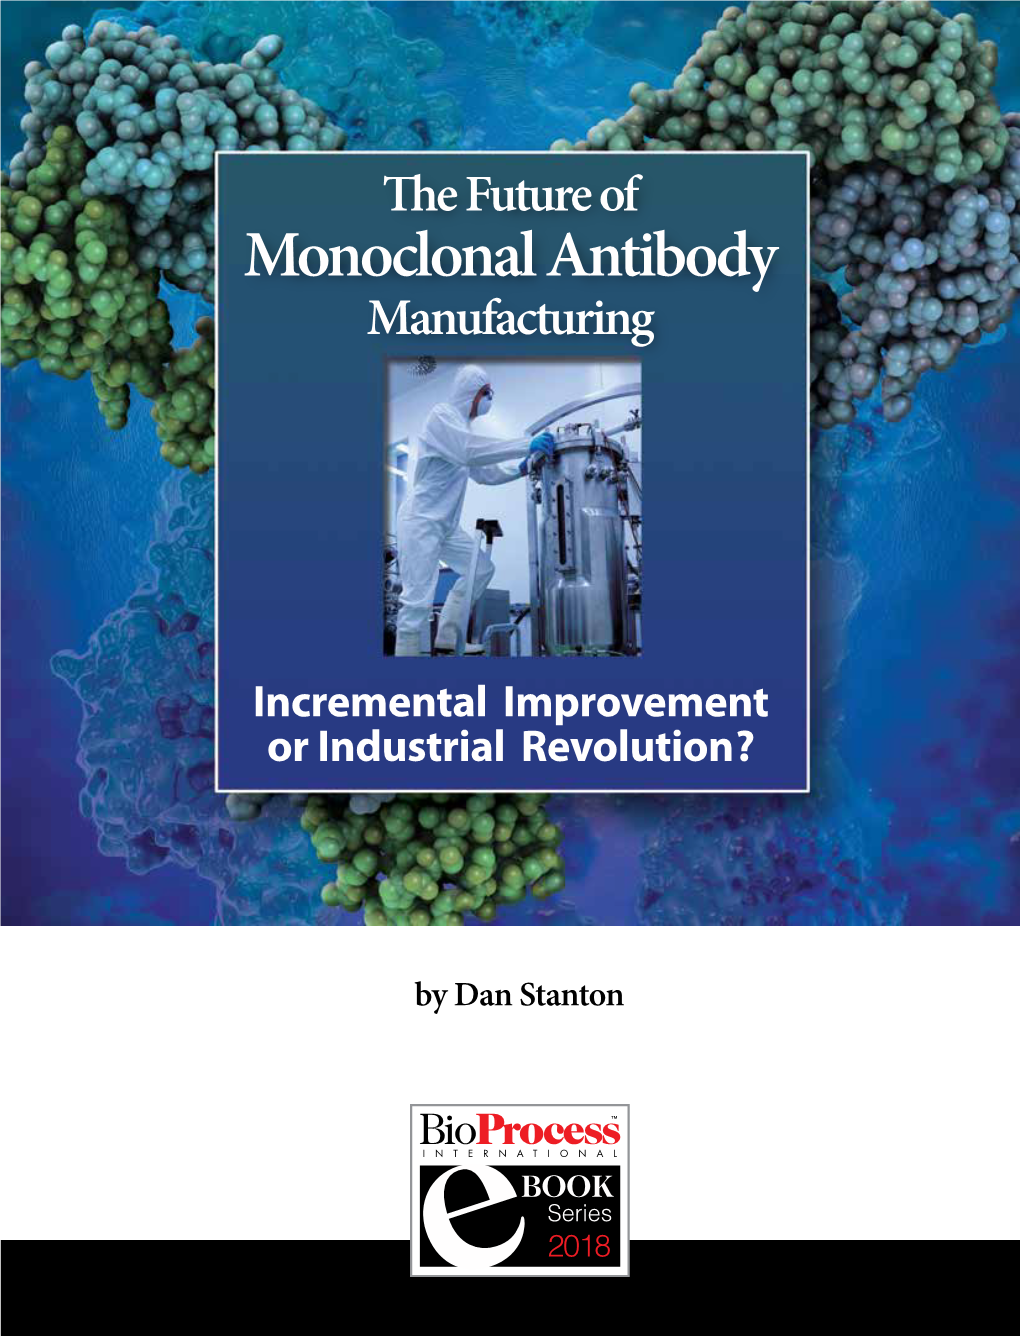 The Future of Monoclonal Antibody Manufacturing